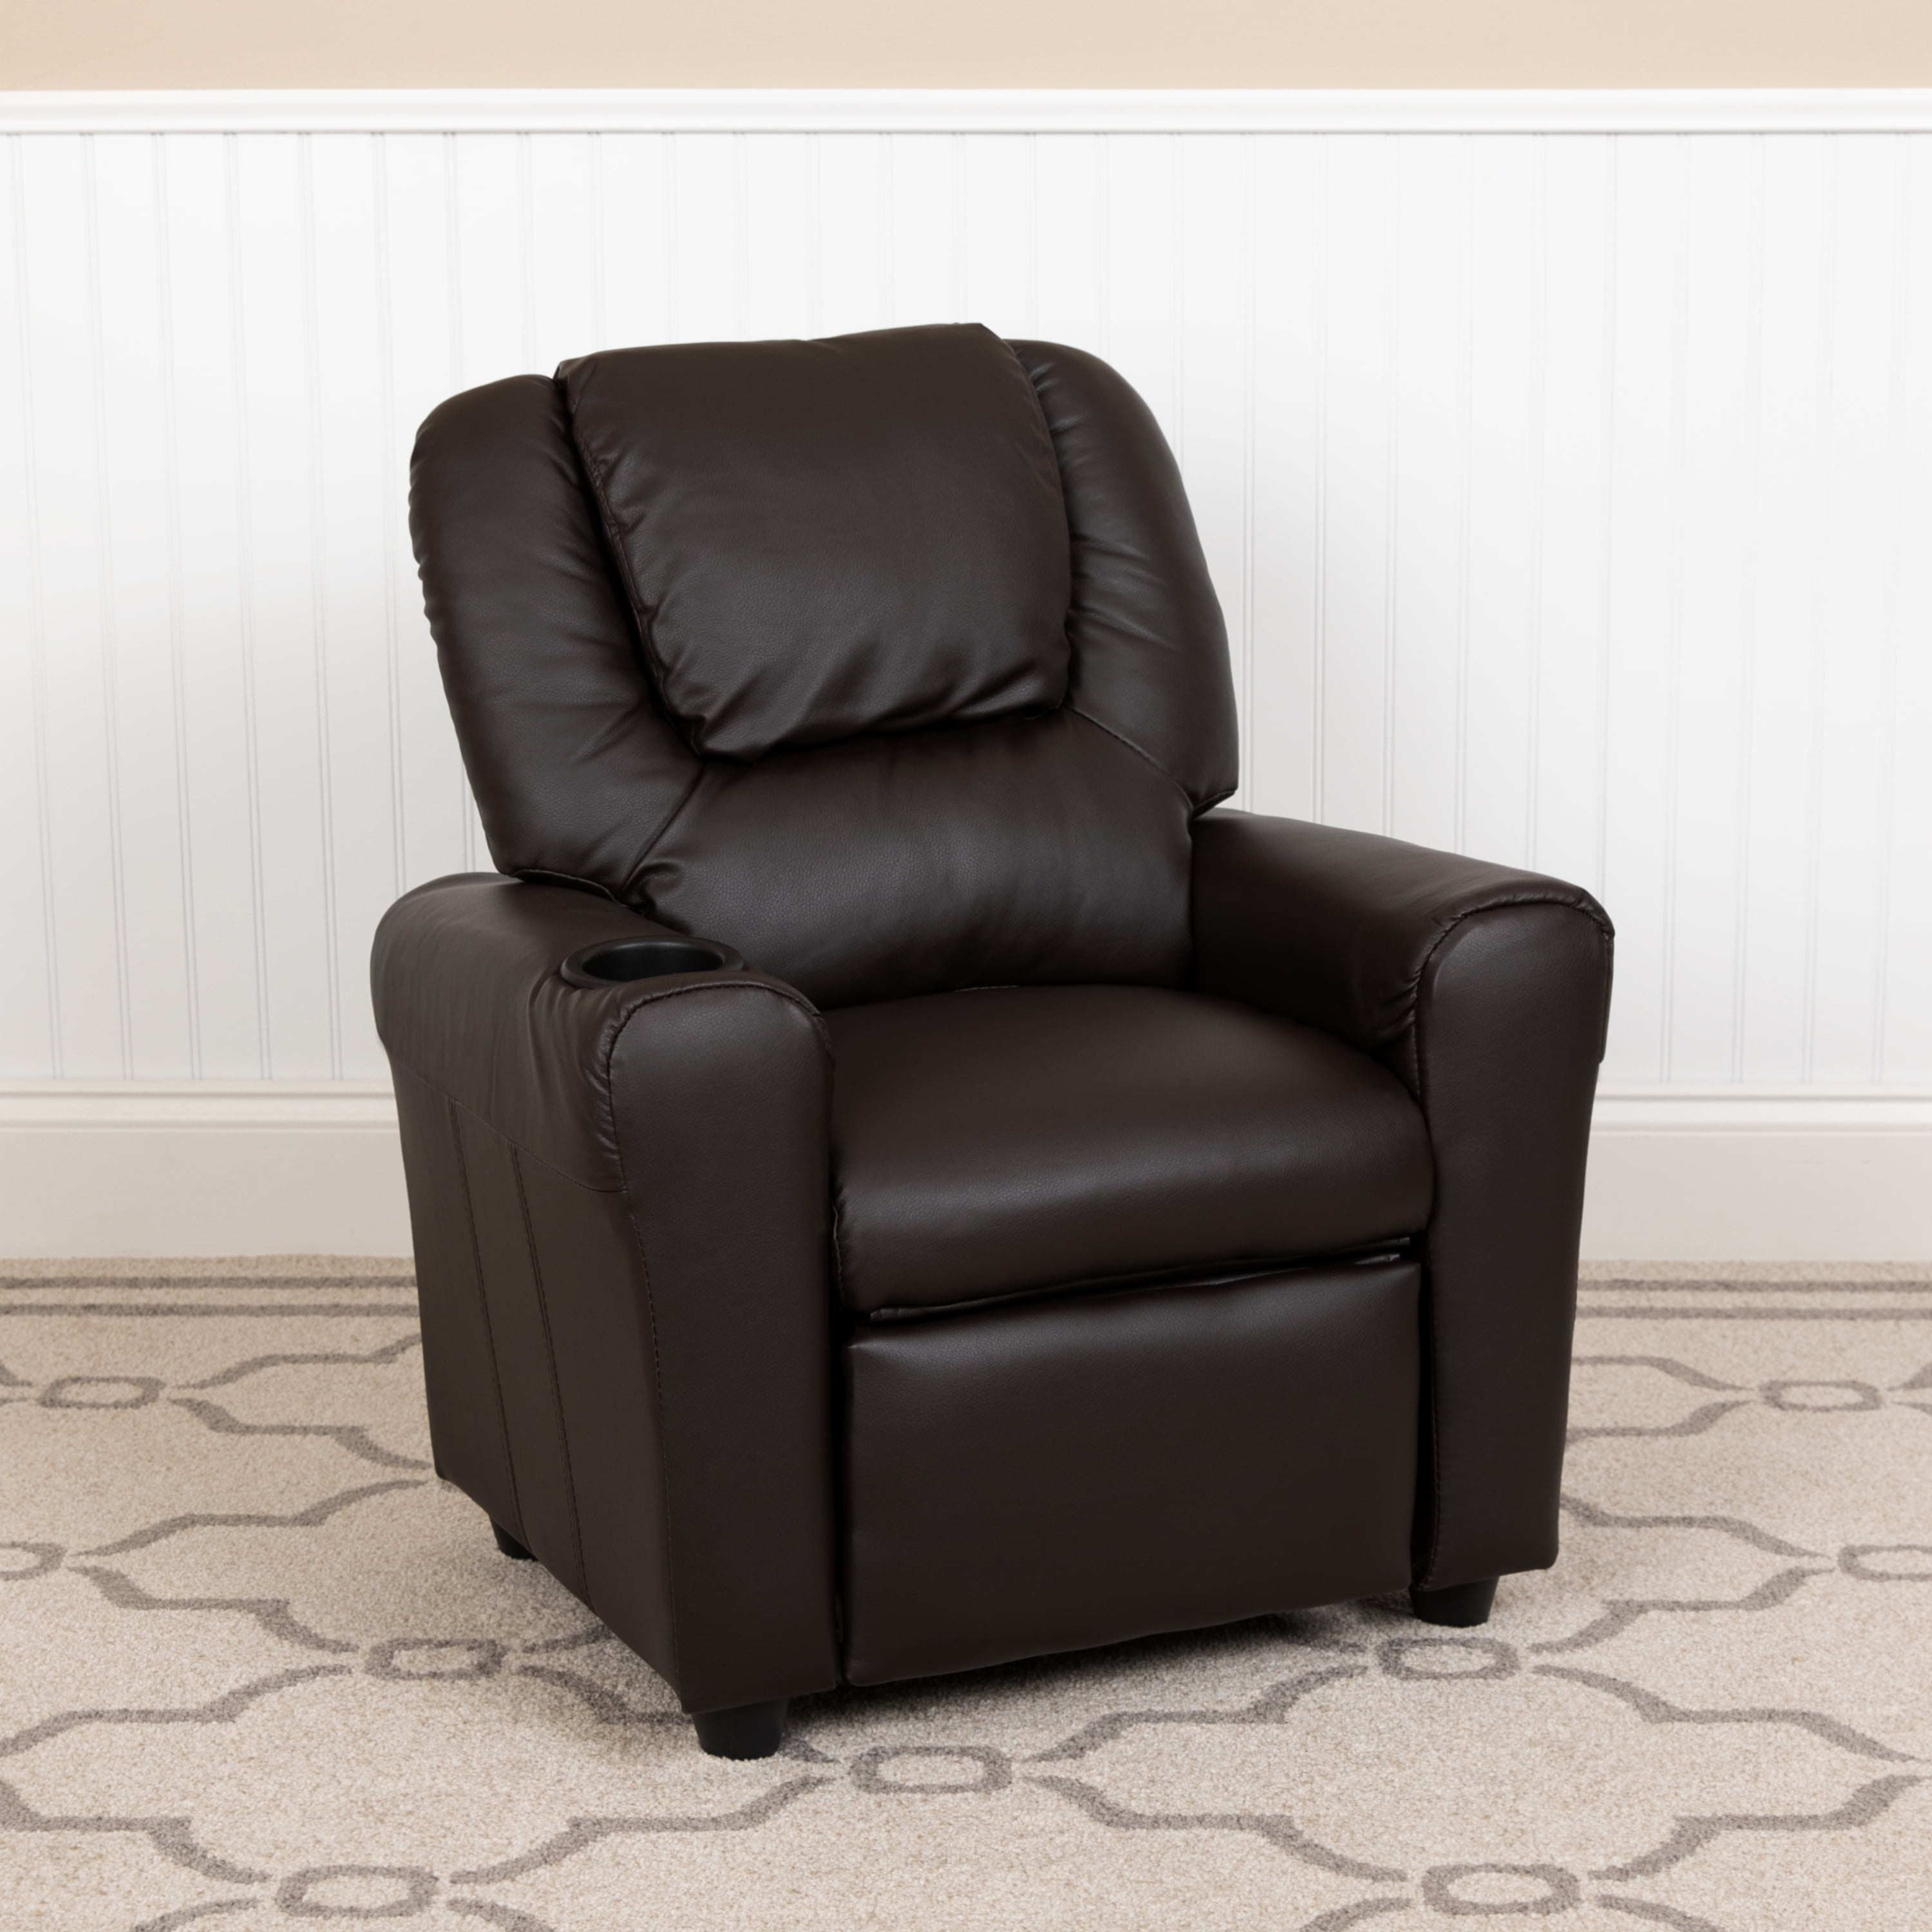 JC Home 7950 Contemporary Black Leather Kids Recliner with Cup Holder 